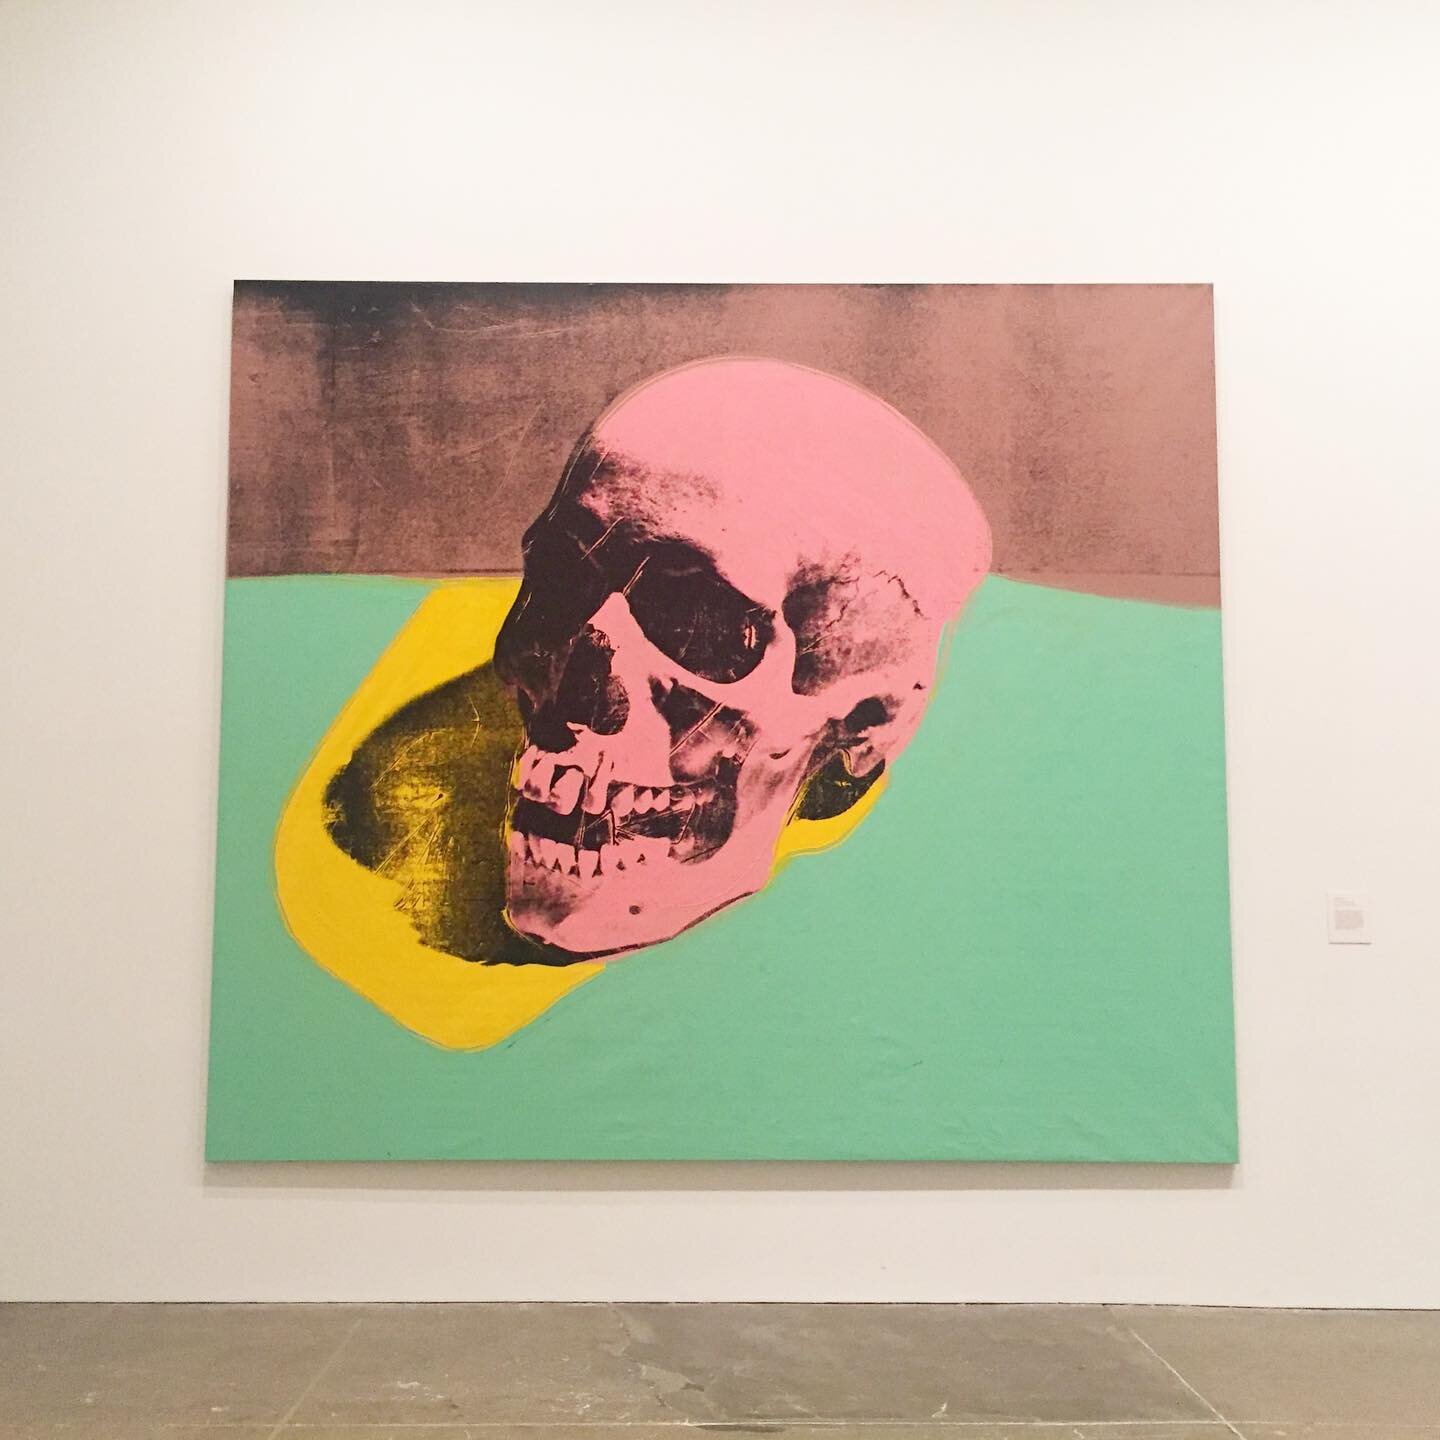 Spooky season may be over, but there&rsquo;s always time to appreciate a good skull painting, especially if it&rsquo;s Warhol.